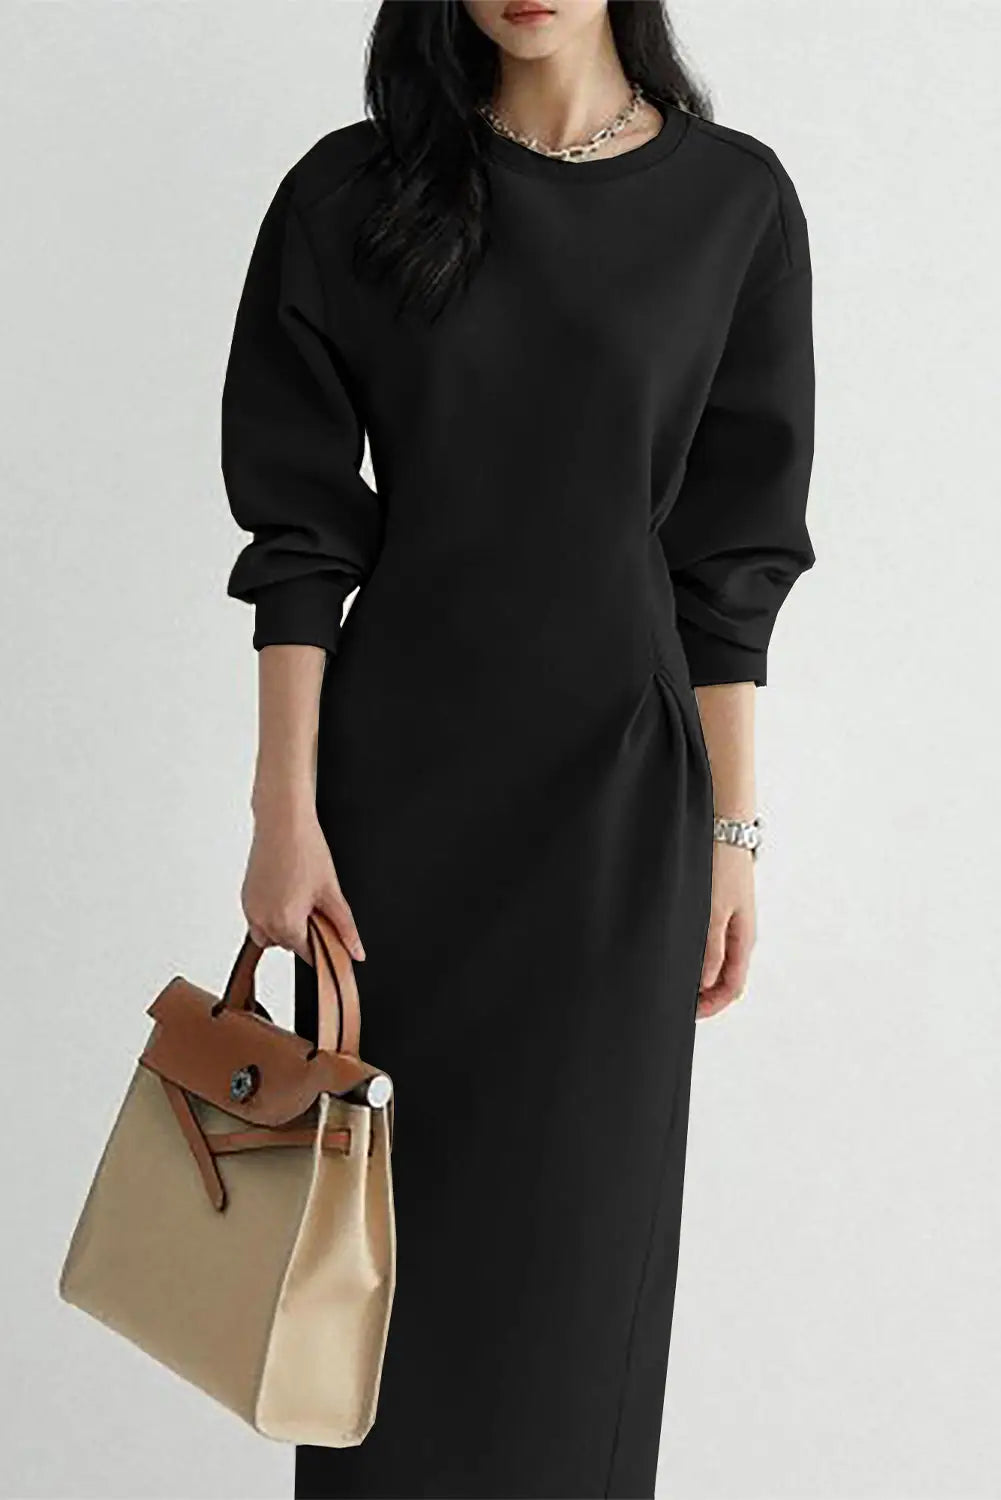 Black solid color cinched waist long sleeve maxi dress - s / 92% polyester + 8% elastane - dresses